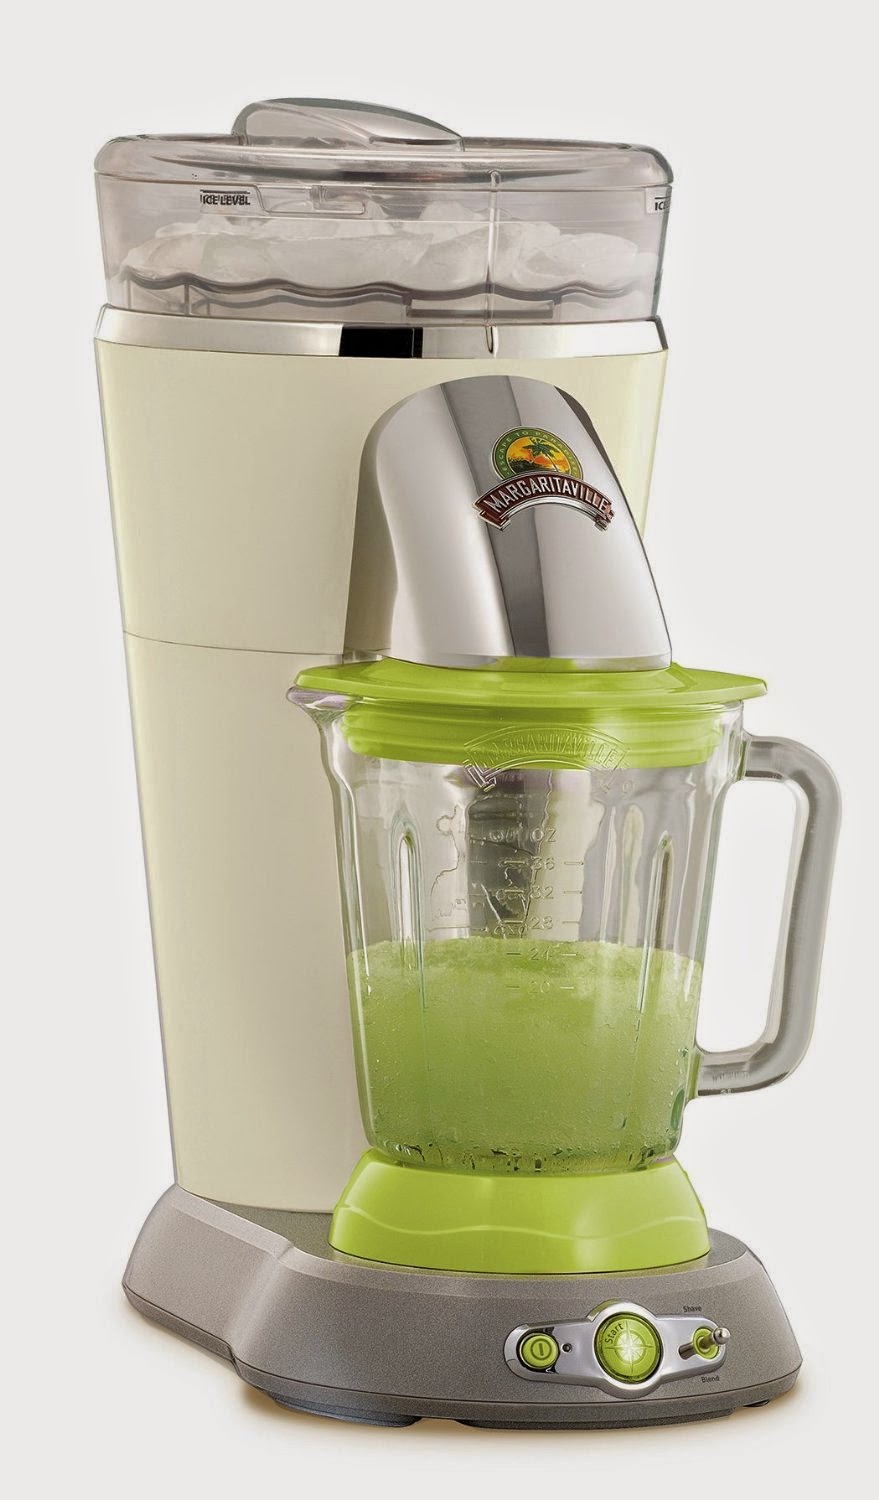 Margaritaville DM0500 Bahamas Frozen Concoction Maker, review, make refreshing cold drinks from slushies to margaritas, shaves the ice for better consistency